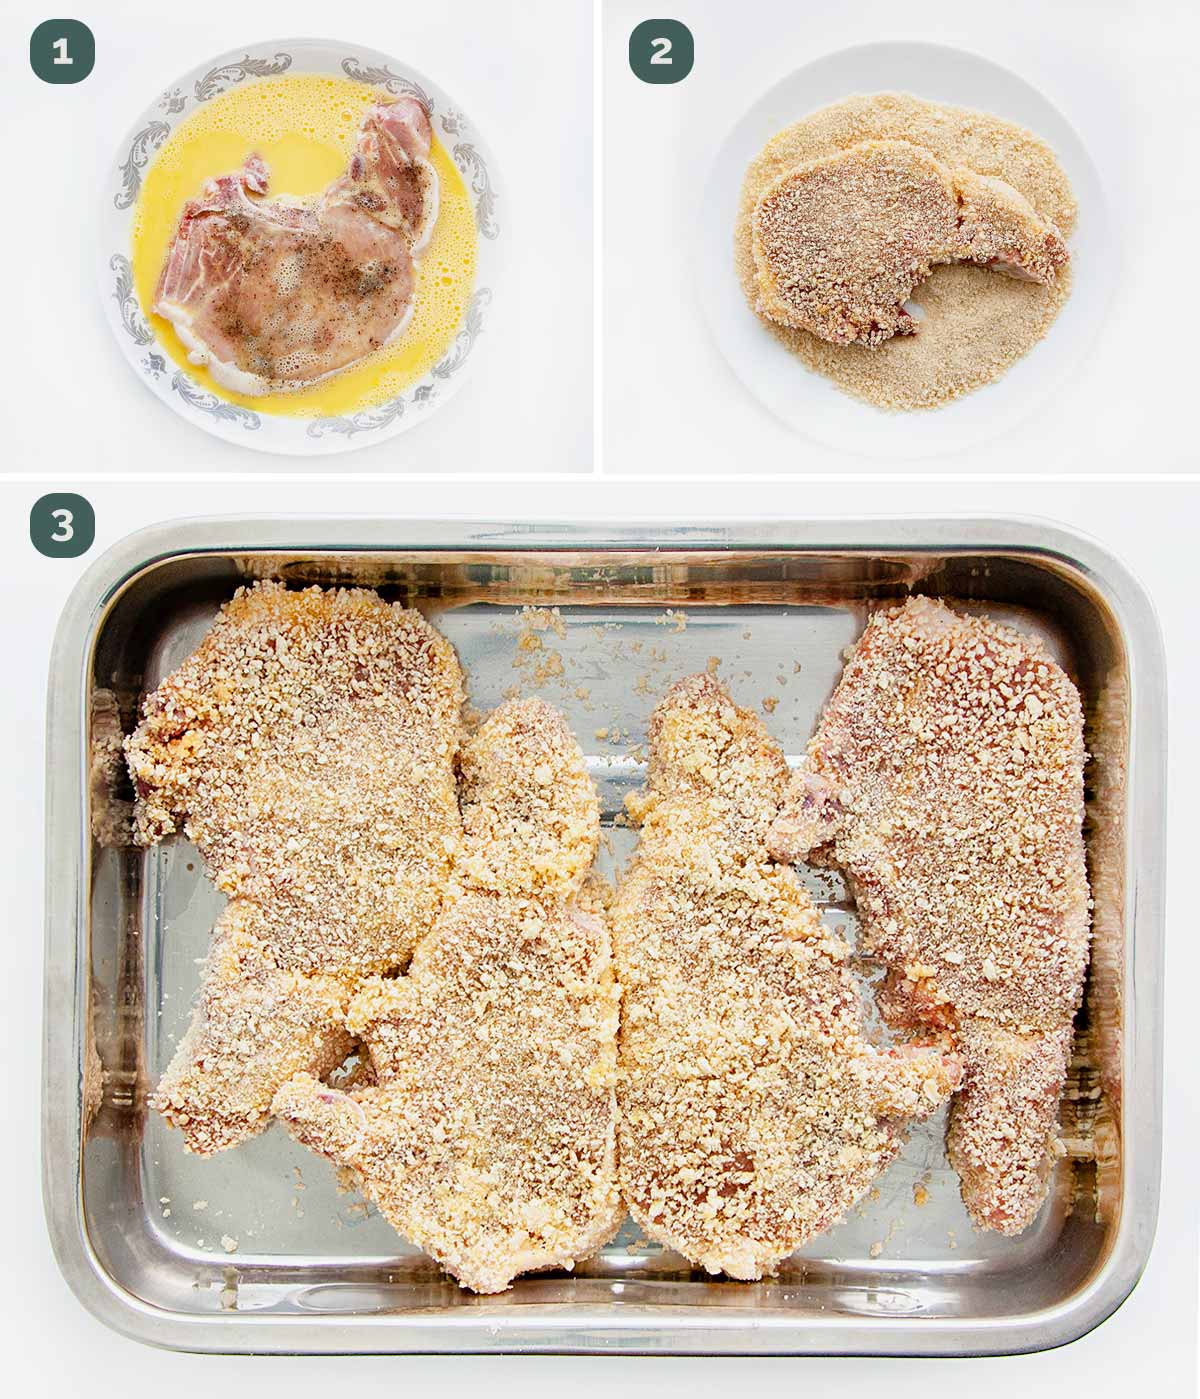 process shots showing how to prep pork chops.